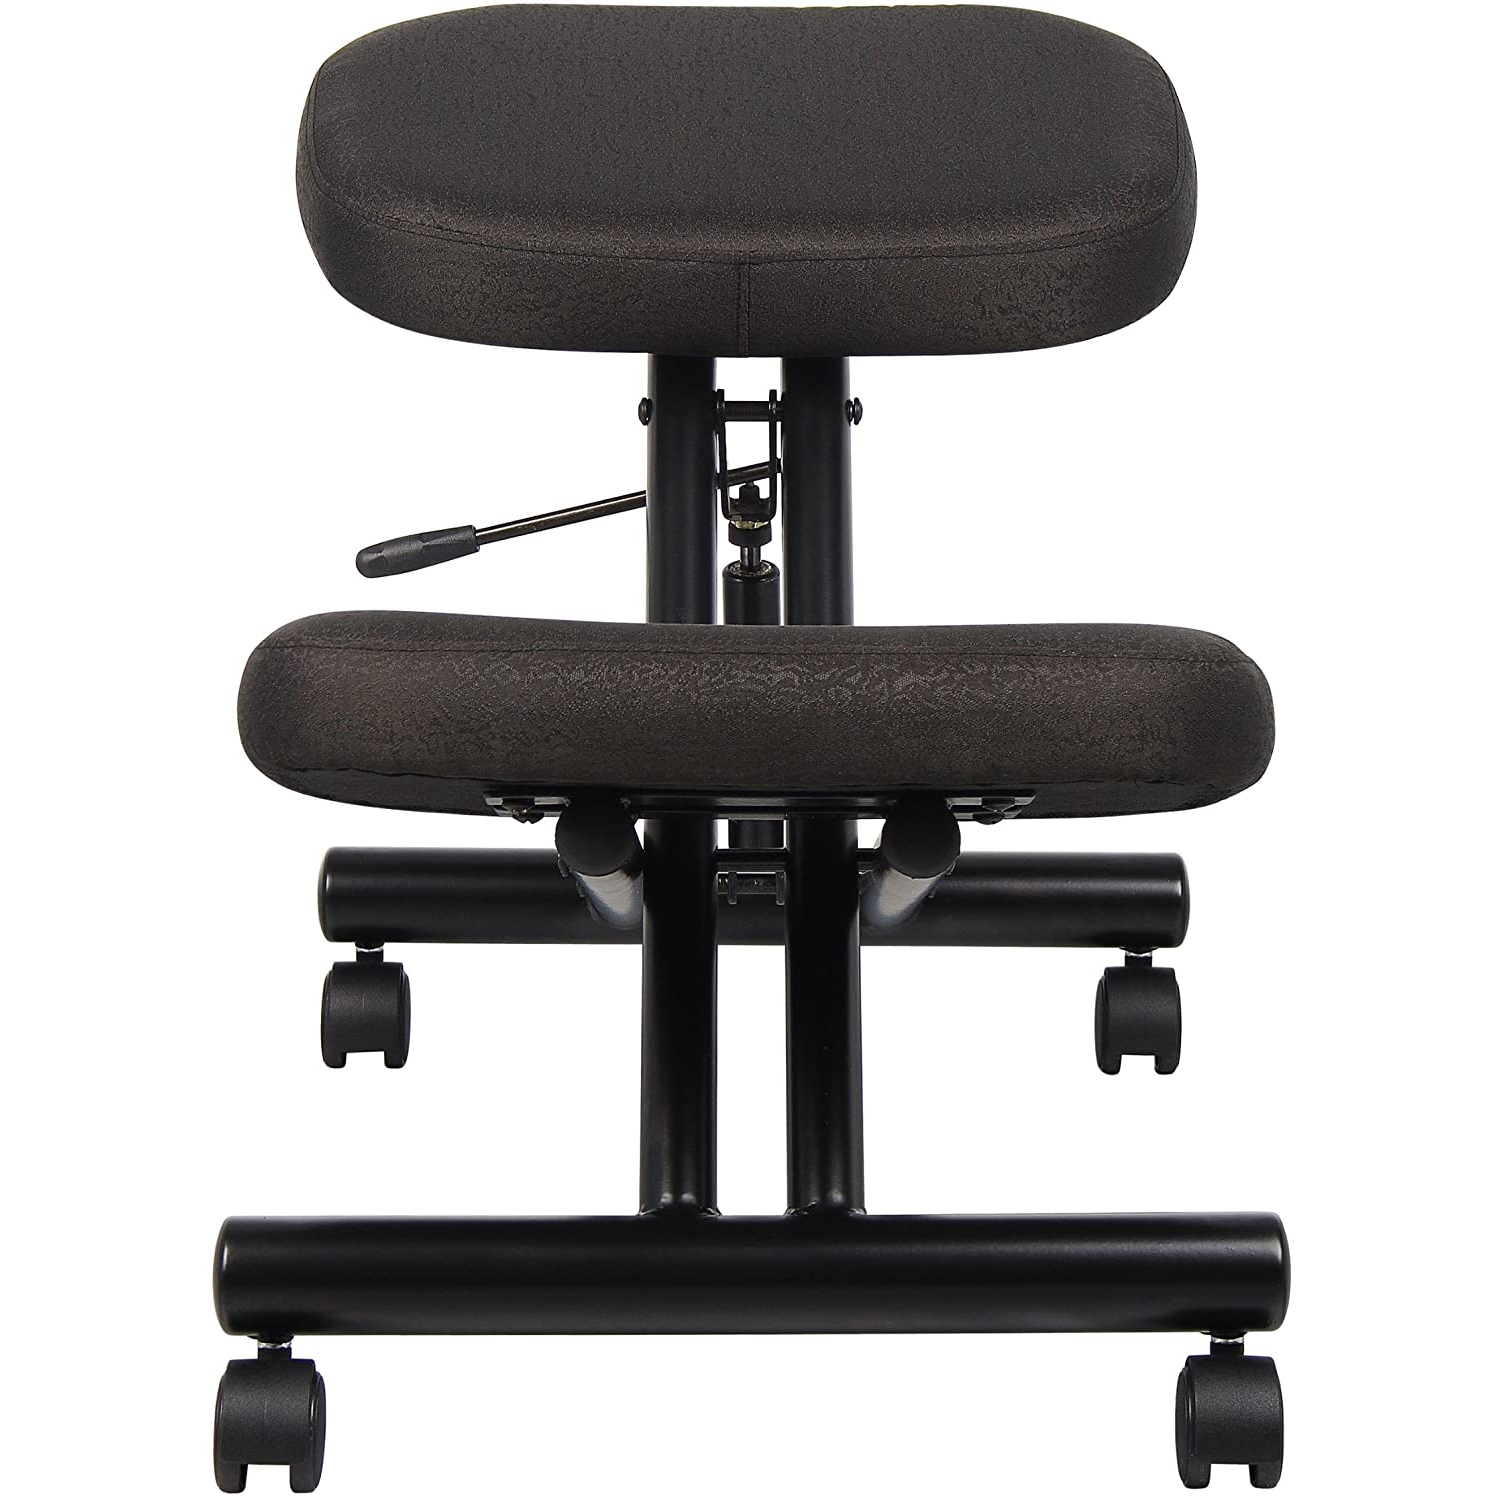 relieve neck and spine to alleviate pain apply to correct back and neck pain knee in line with ergonomic chair SUNBJ Kneeling chair Color : Brown 